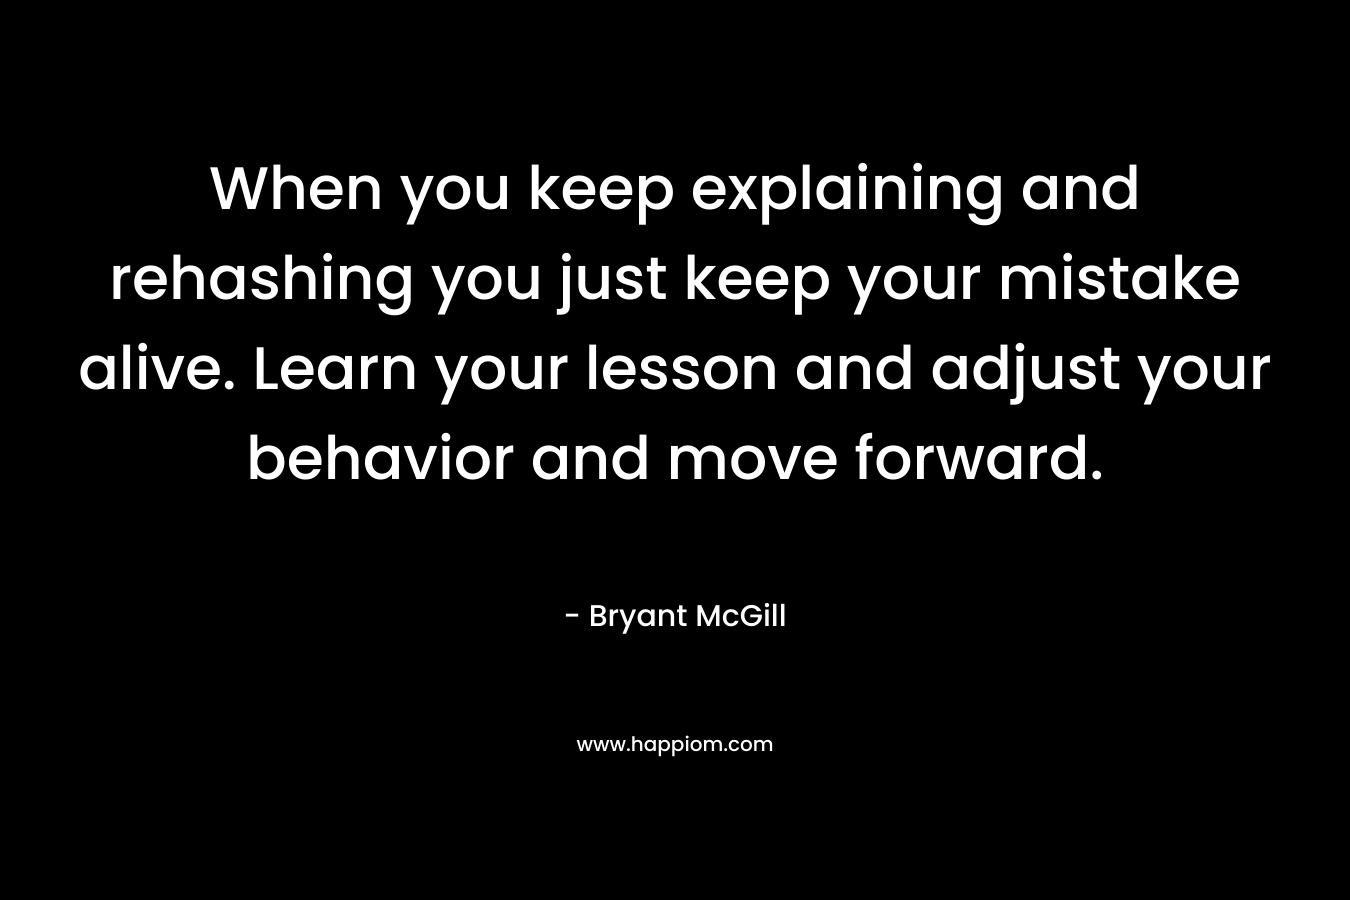 When you keep explaining and rehashing you just keep your mistake alive. Learn your lesson and adjust your behavior and move forward.